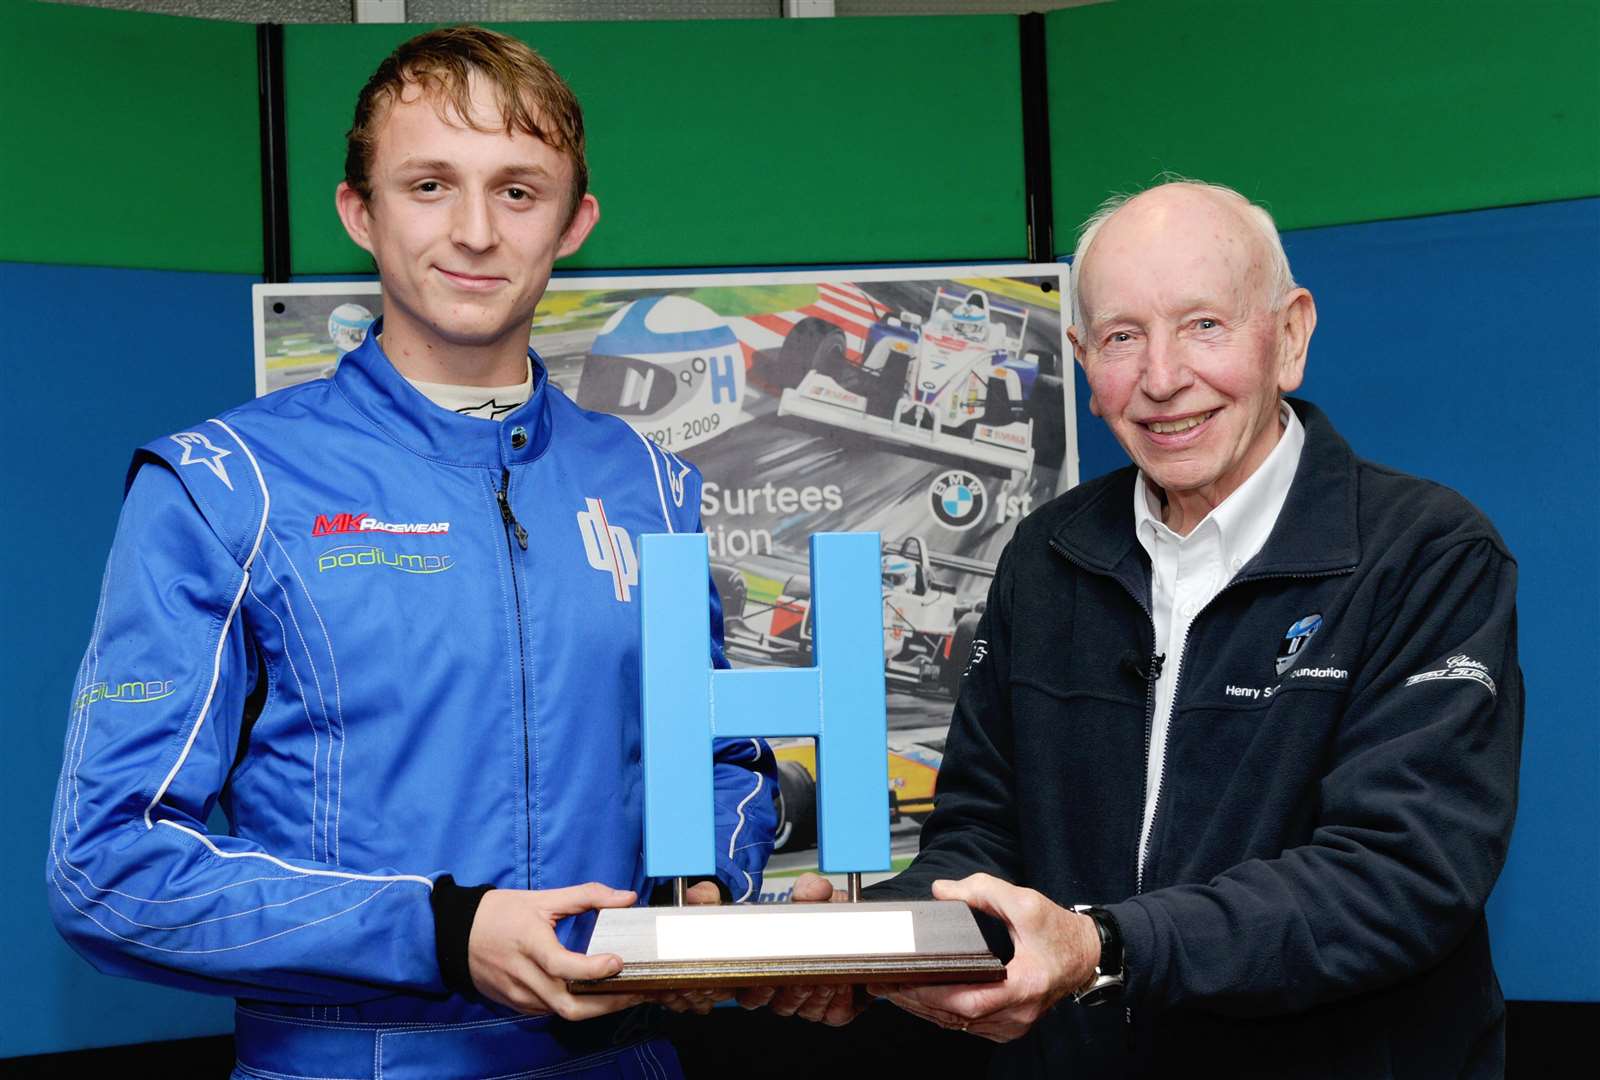 Sportscar racer David Pittard received a Henry ‘H’ trophy after winning the 2013 Henry Surtees Challenge. Picture: Simon Hildrew